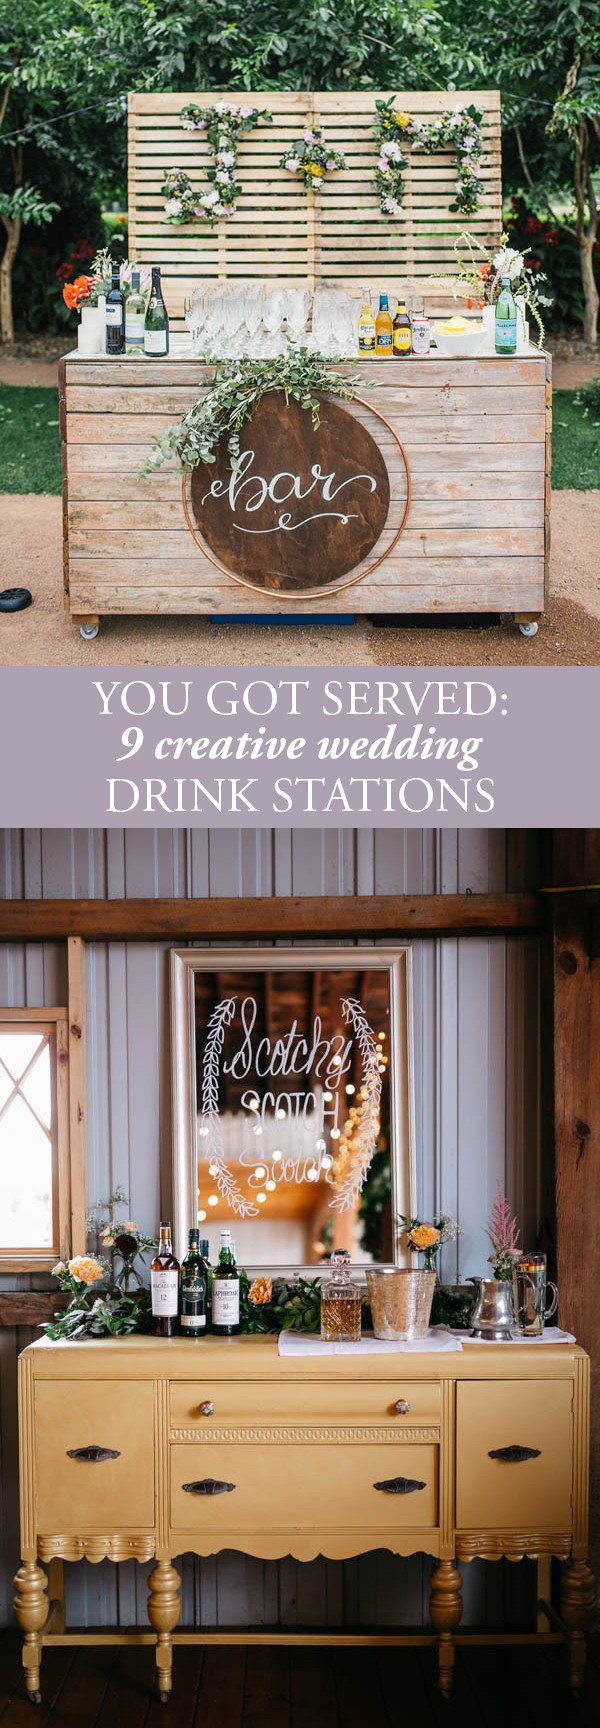 15 Must-Haves for a Beautiful Beverage Station  Drink station, Wedding  drinks reception, Wedding drink